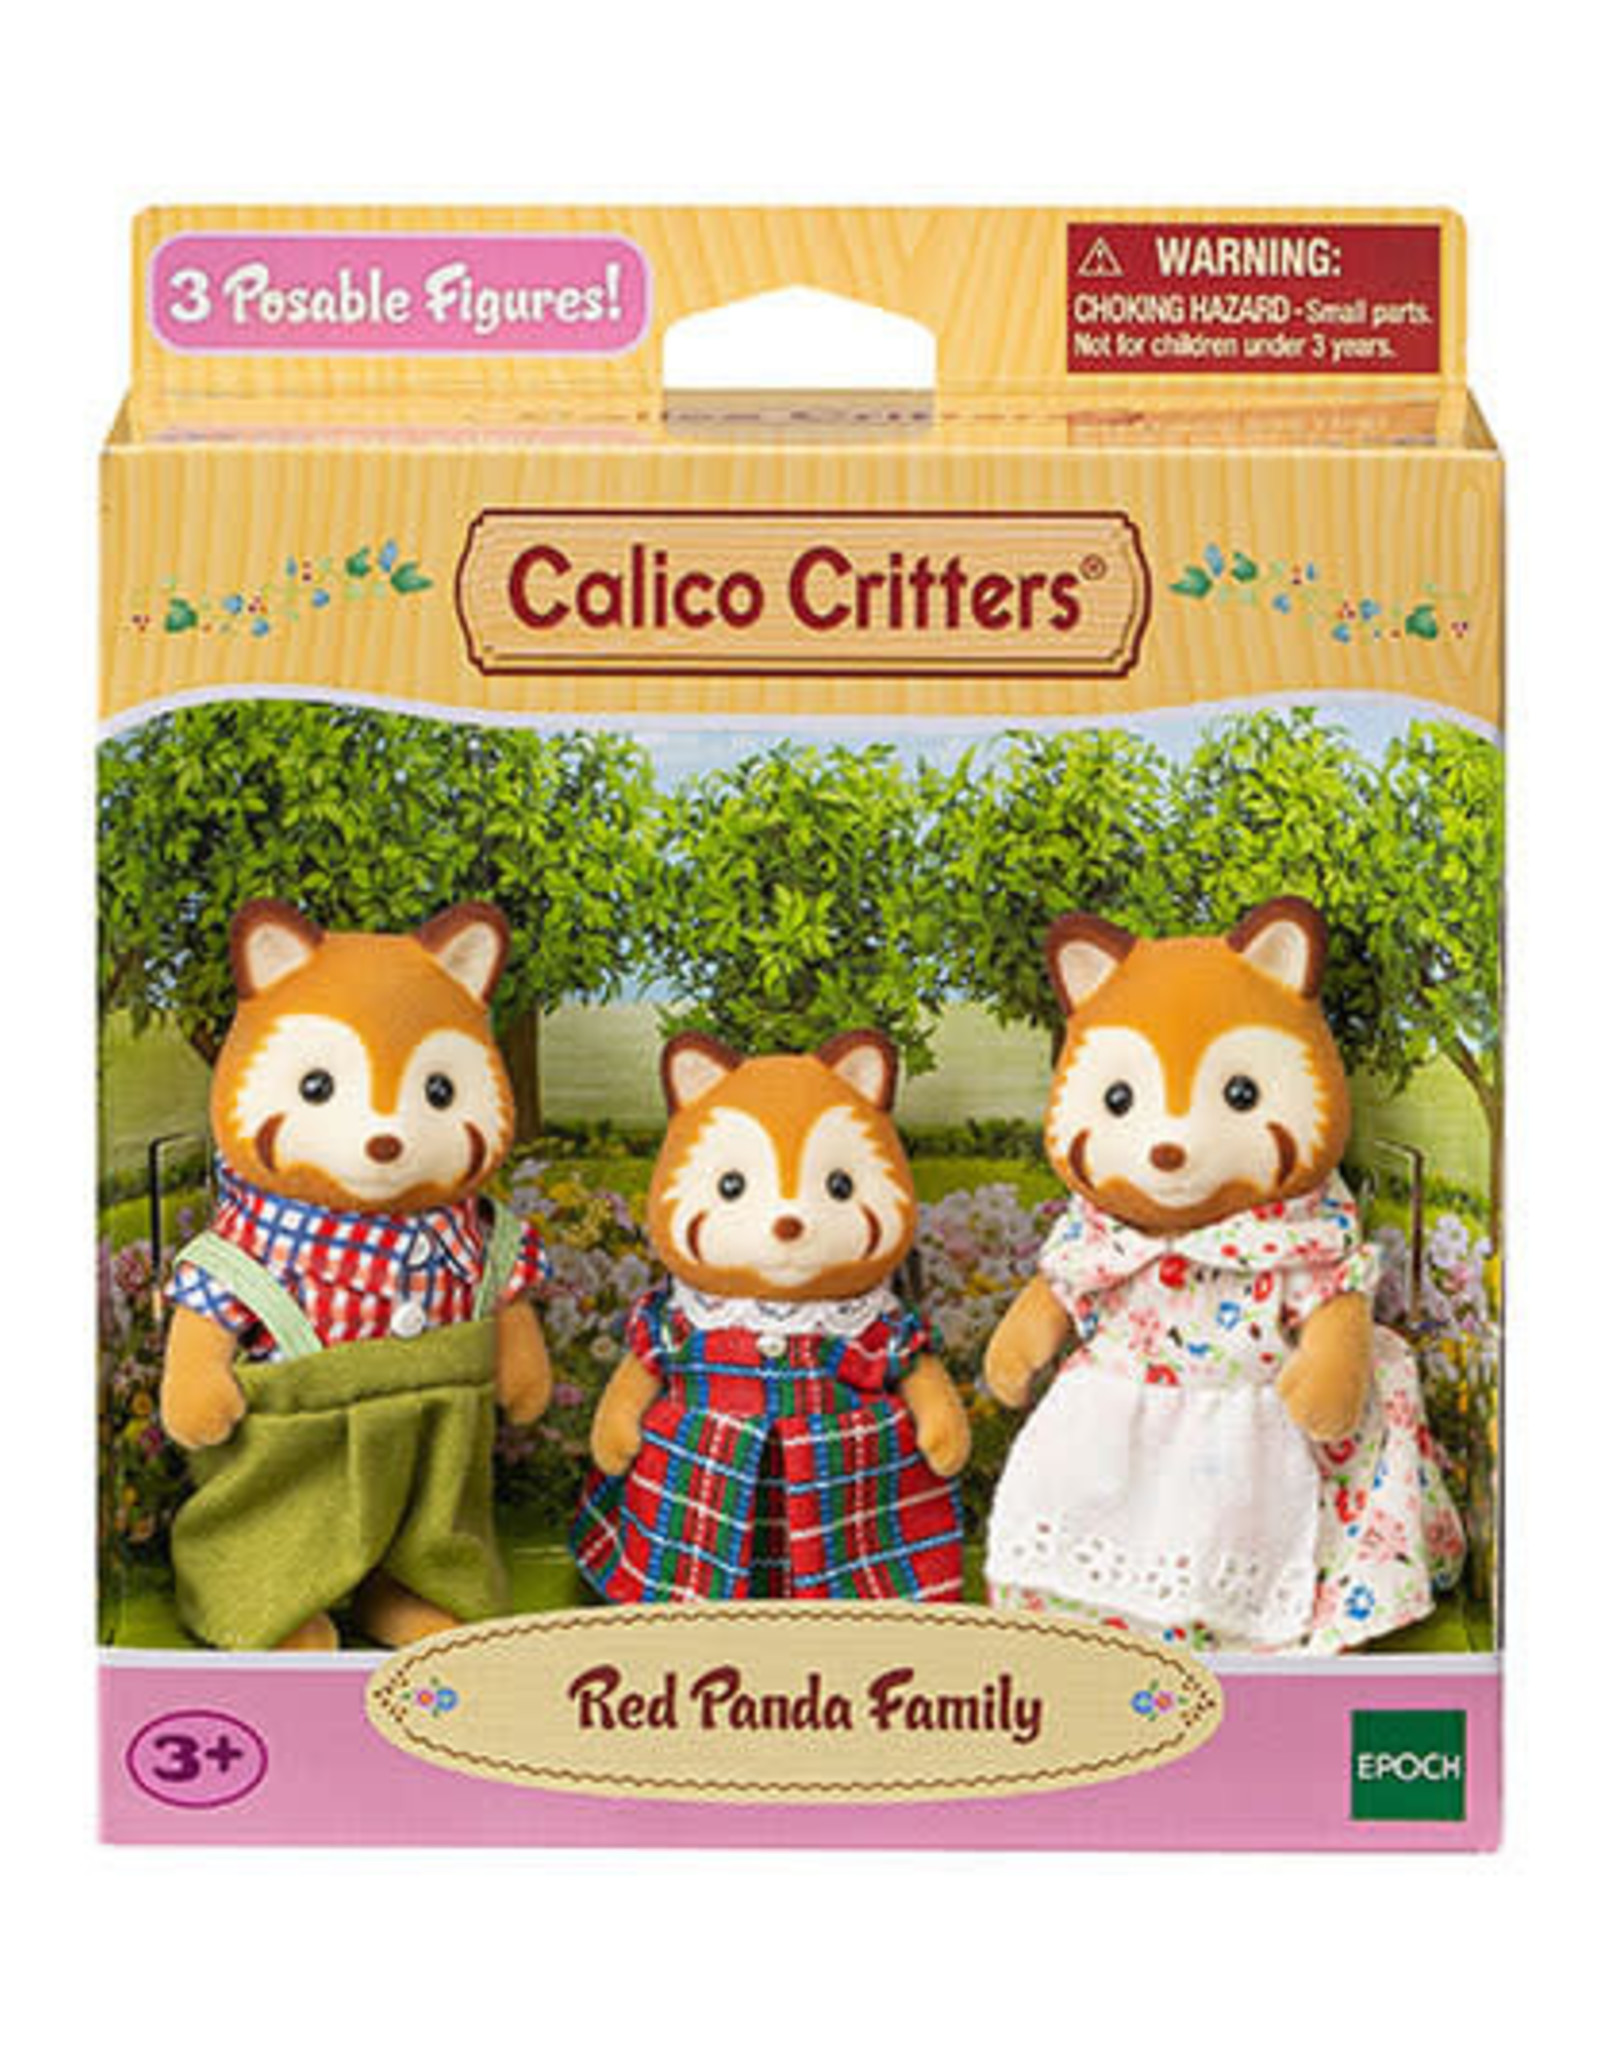 Calico Critters CC Red Panda Family